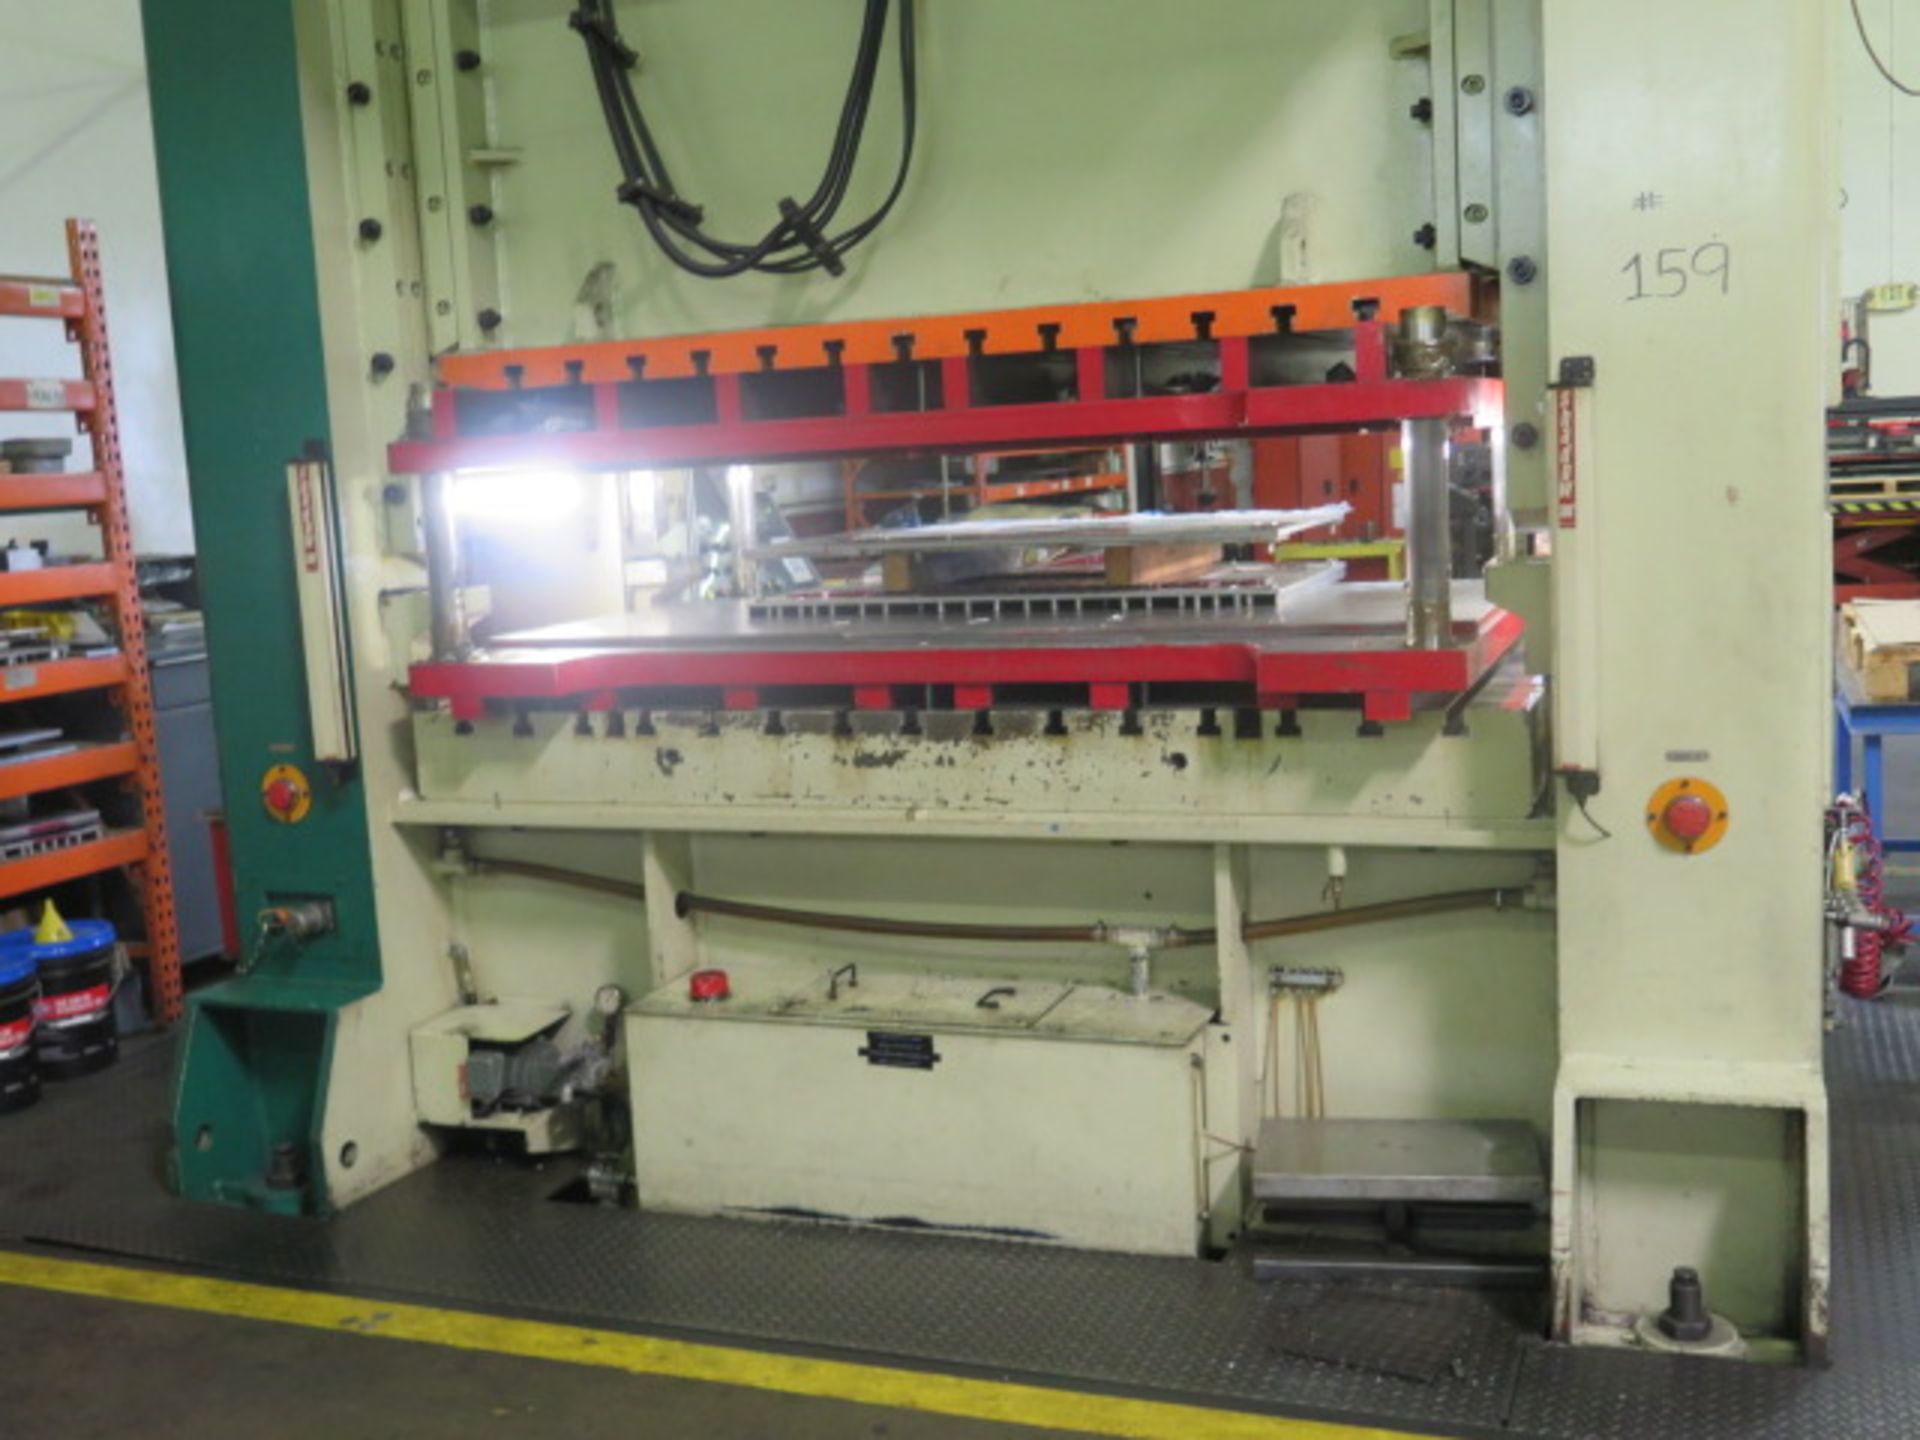 1997 Seyi HDS-275-H 275 Ton Gap Frame Double Crank Press s/n D275-045 w/ Seyi Controls, SOLS AS IS - Image 11 of 18